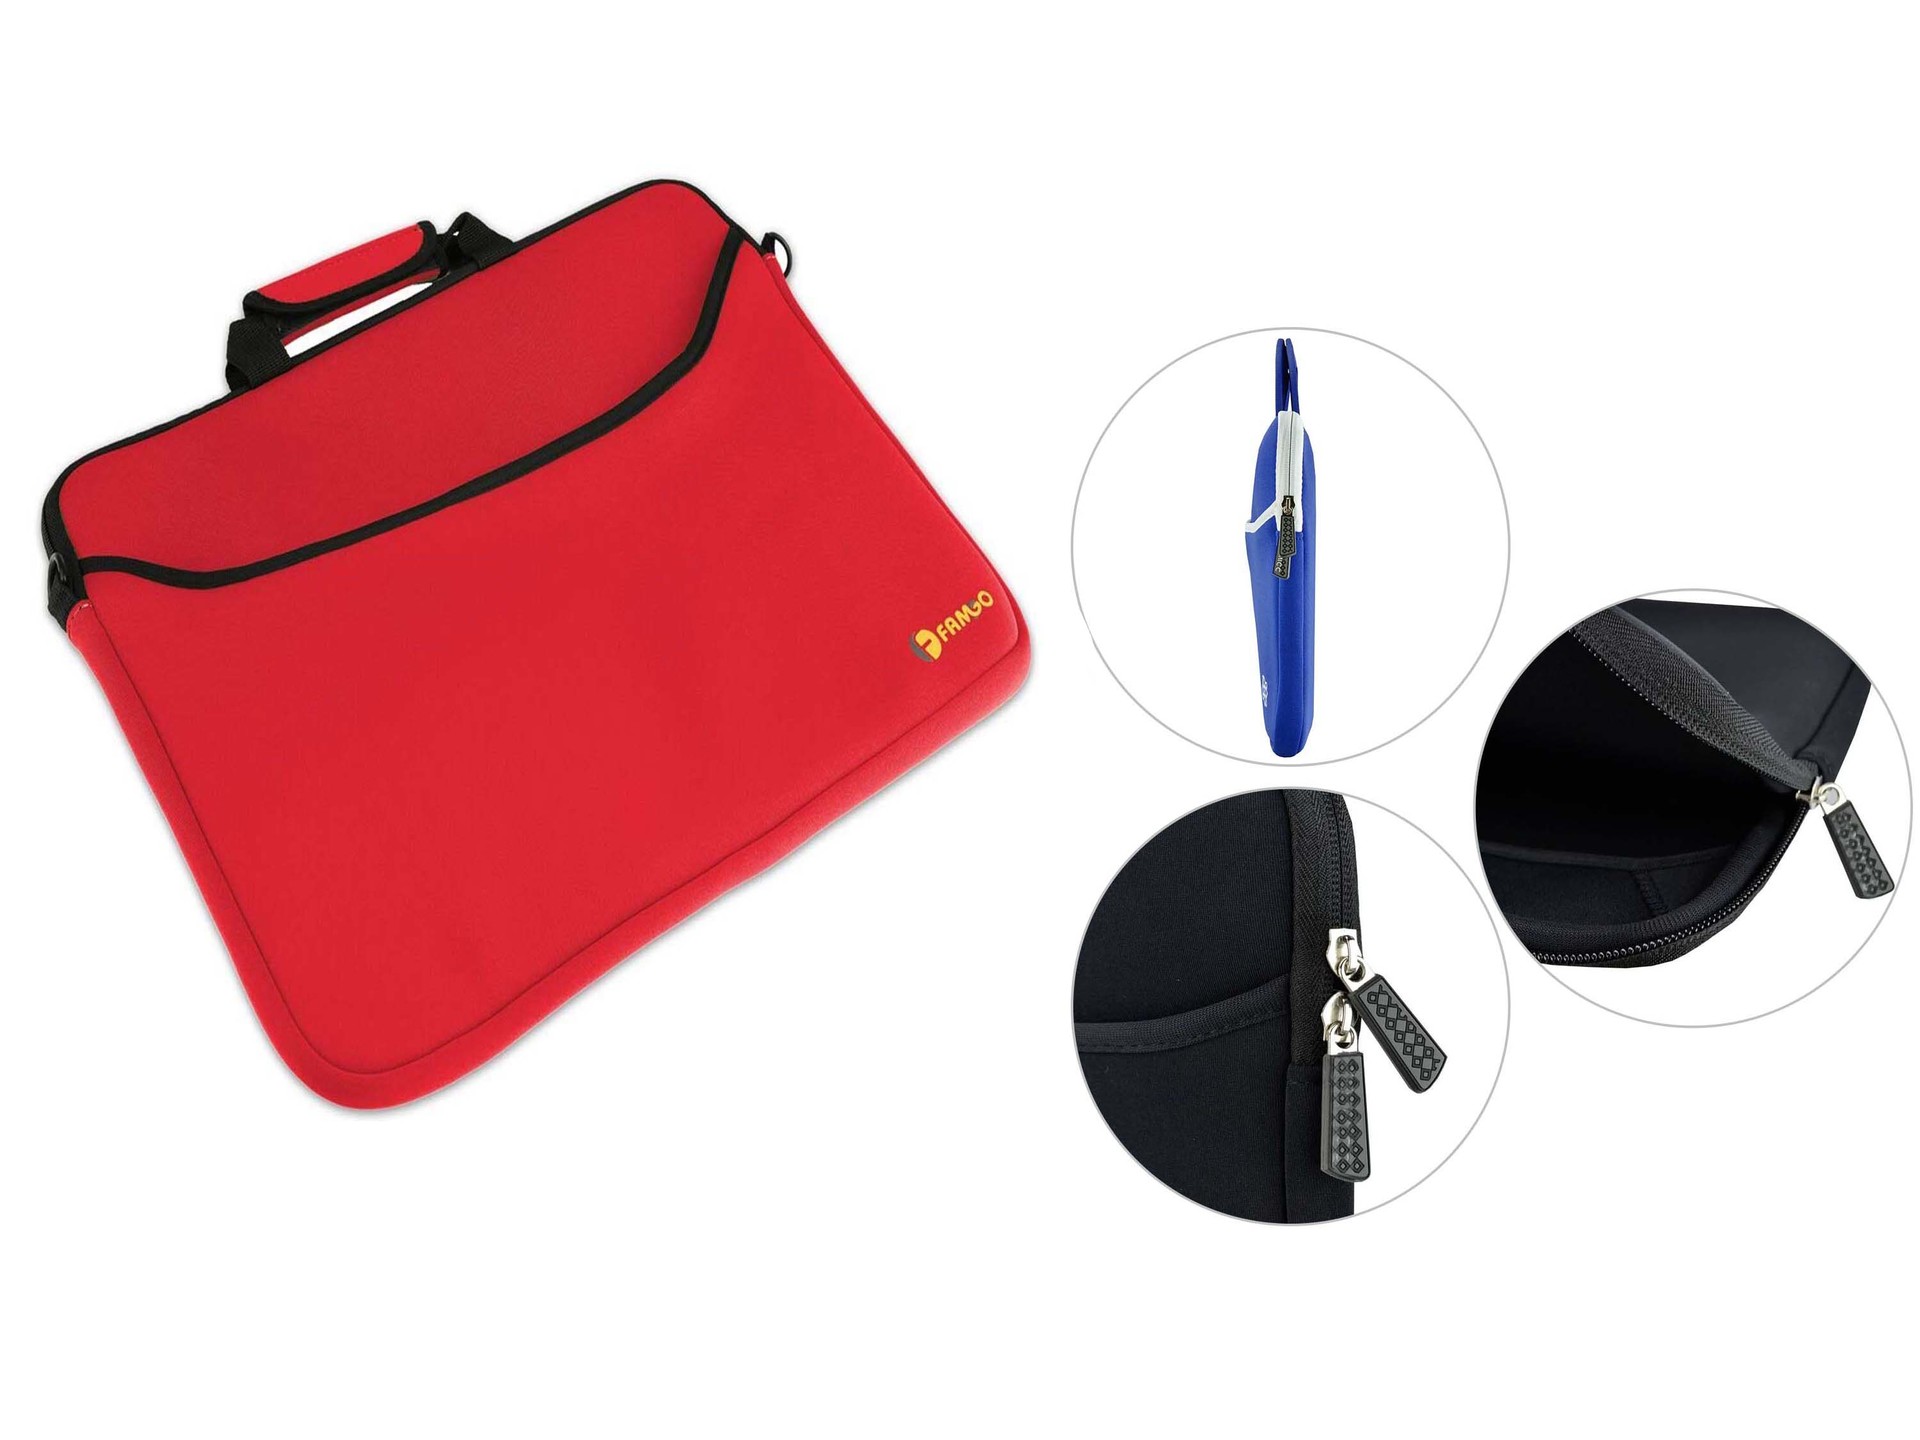 computer Neoprene bag with accessories pocket for hiking